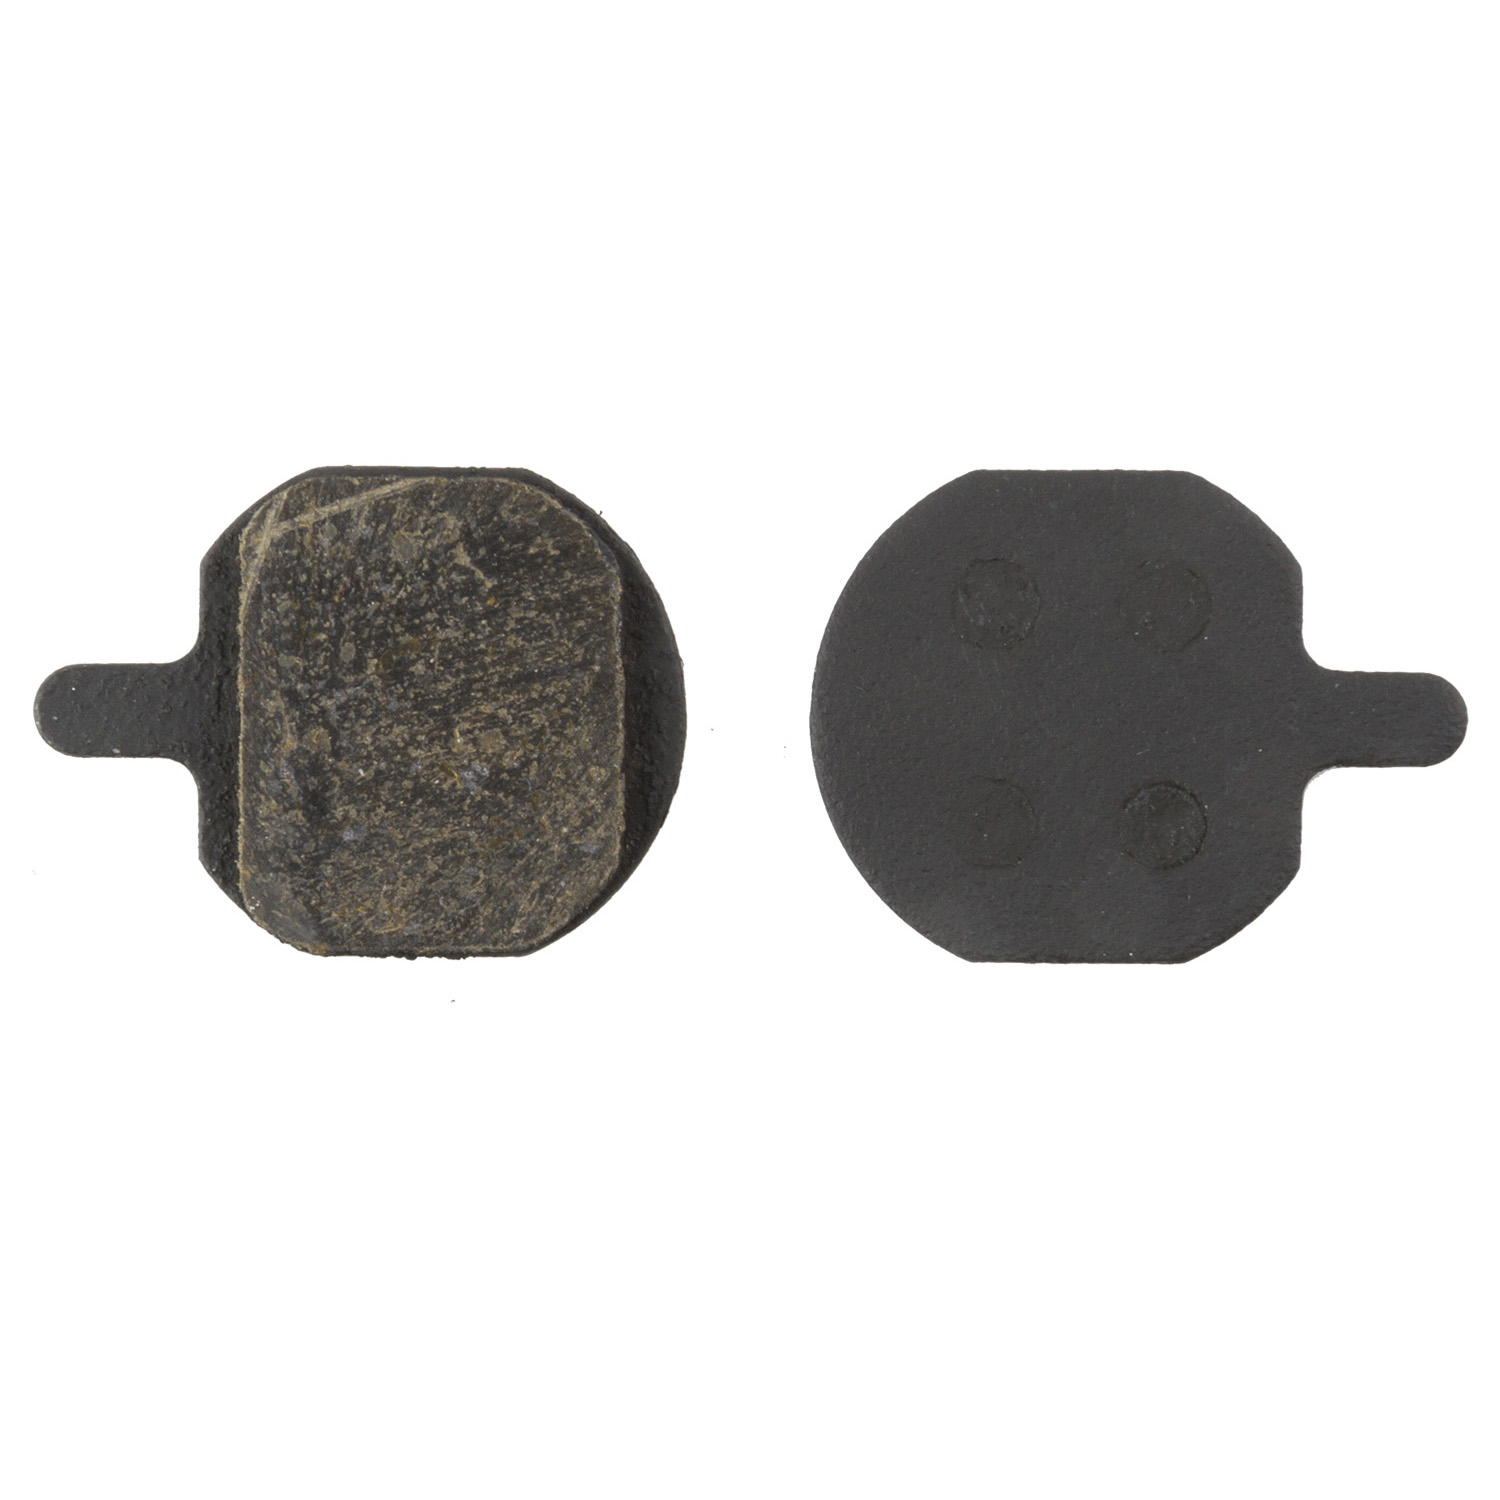 360573 – PROMAX H1 brake pads for disc brake – AVAILABLE IN SELECTED BIKE SHOPS